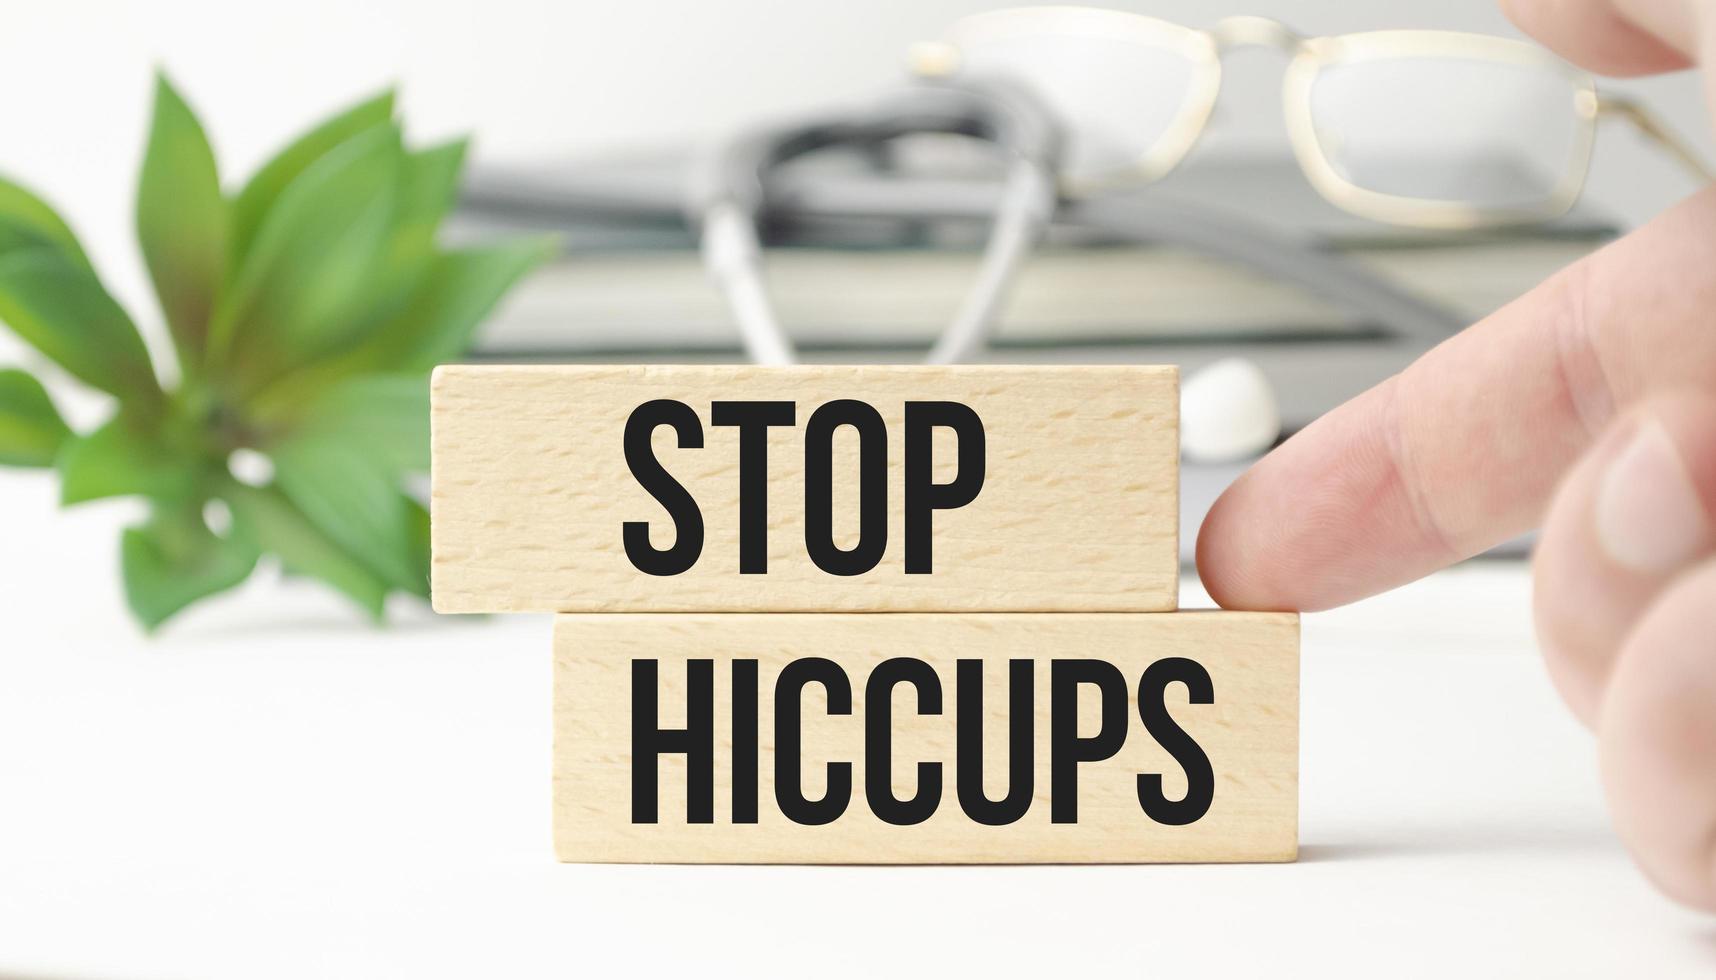 The words STOP HICCUPS is made of wooden cubes photo